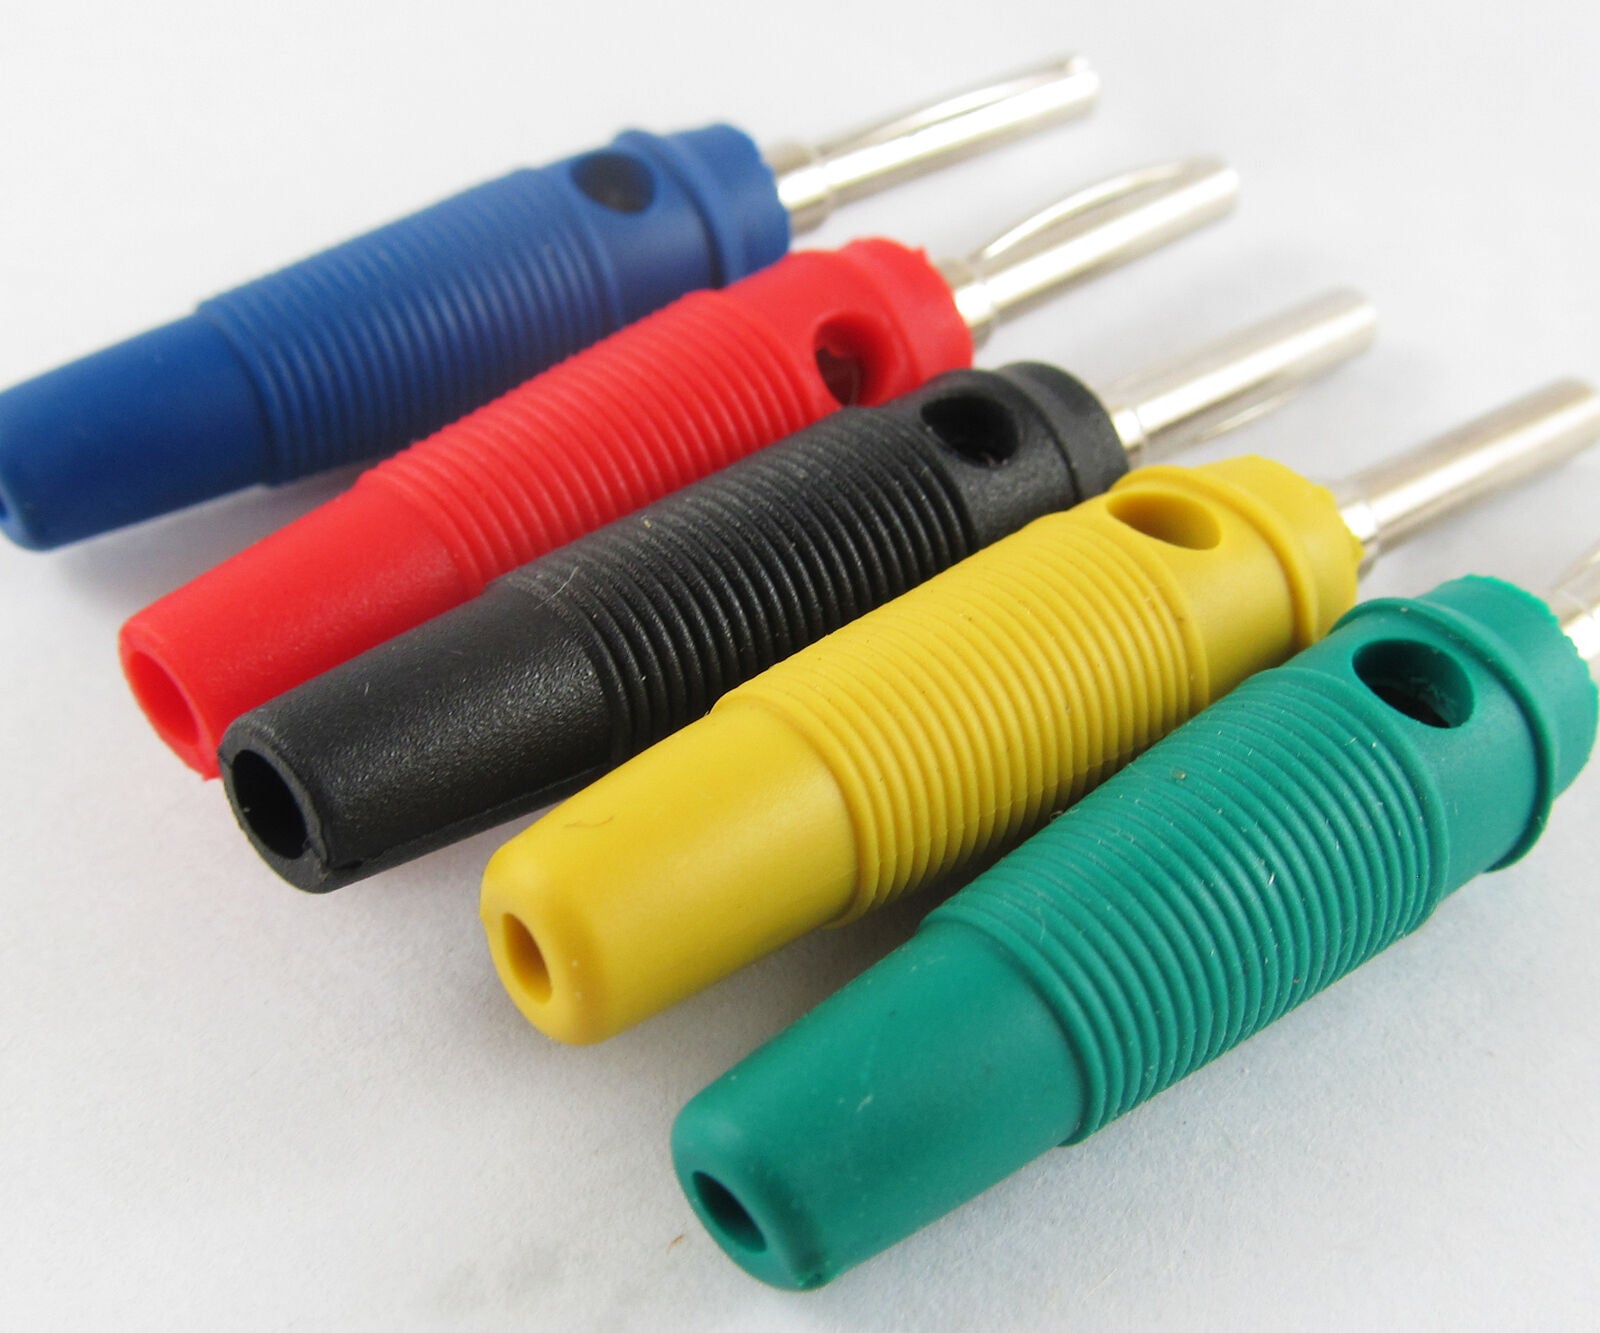 4sets 5 colors 4mm High quality Free Solder Brass Banana Plug Test Adapter